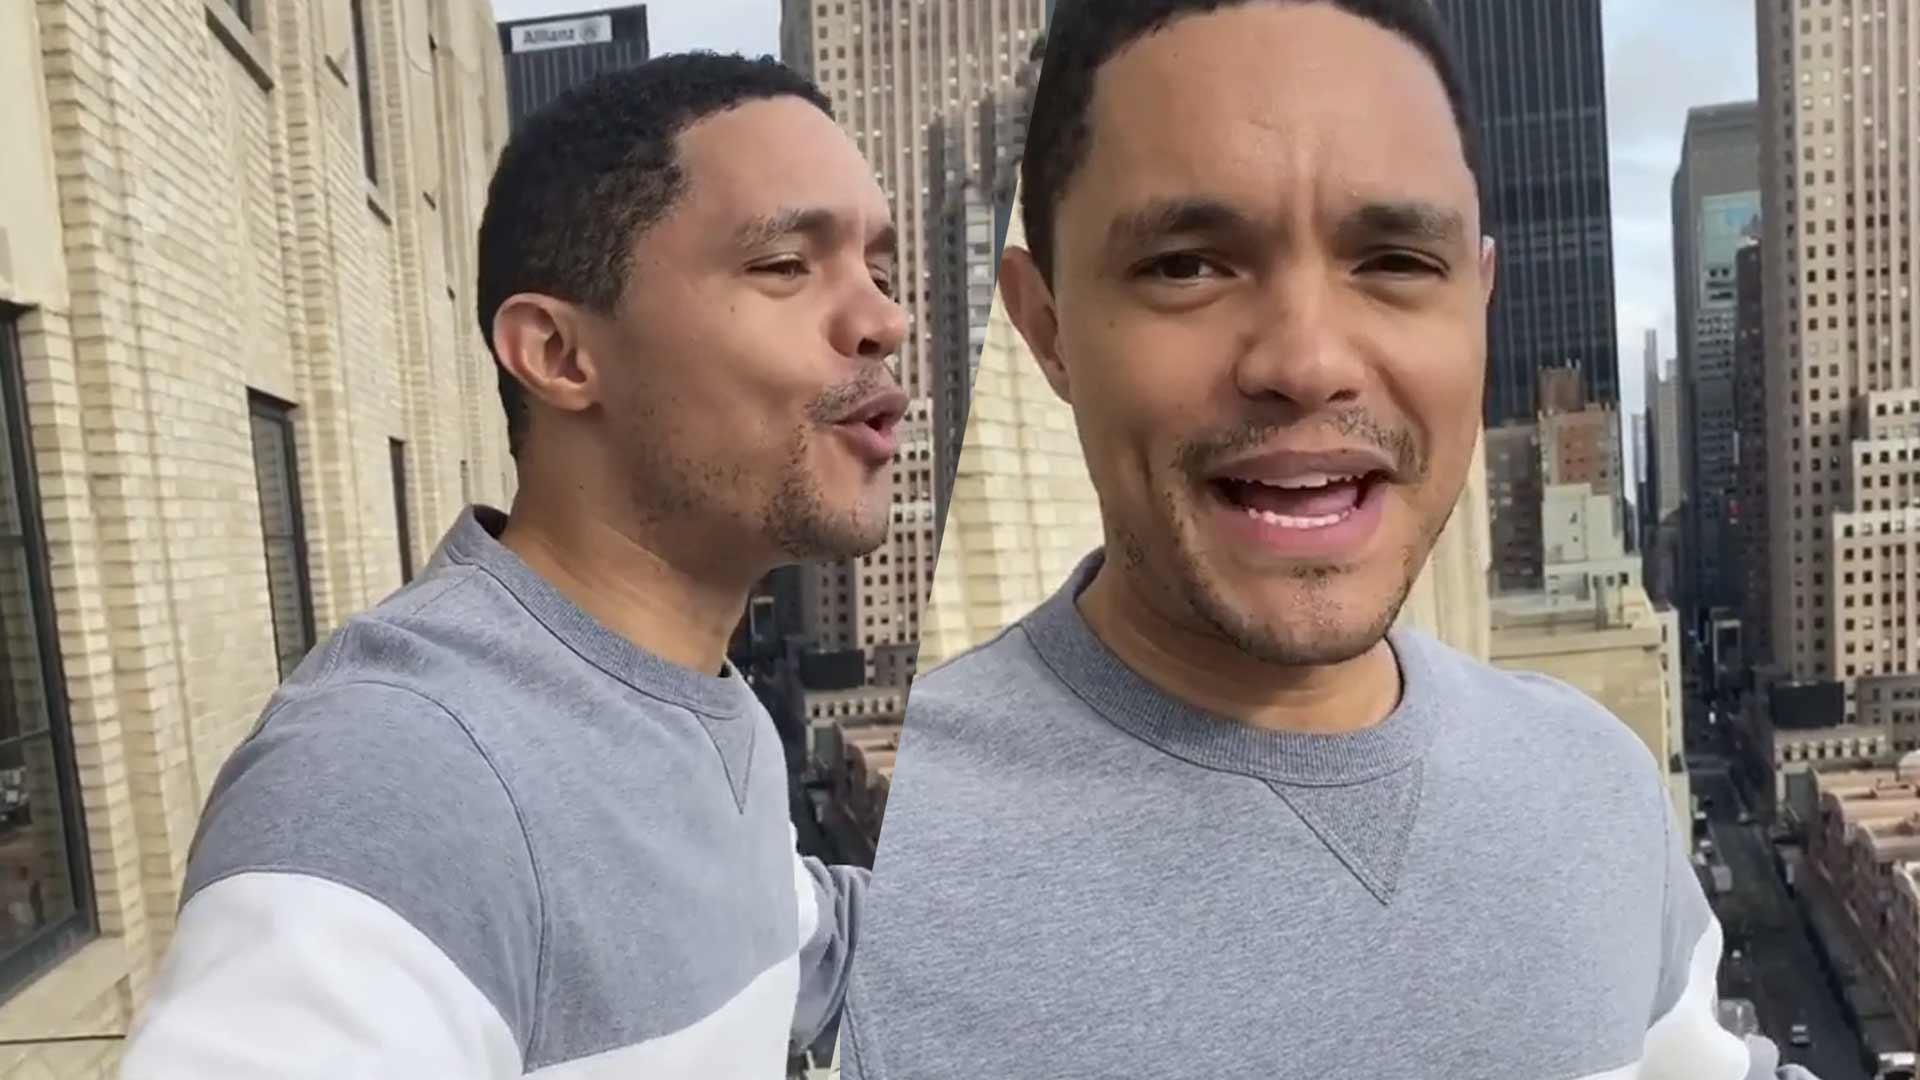 New Yorkers Tell Trevor Noah To ‘Shut The F Up’ When He Sings Disney Song From His Balcony